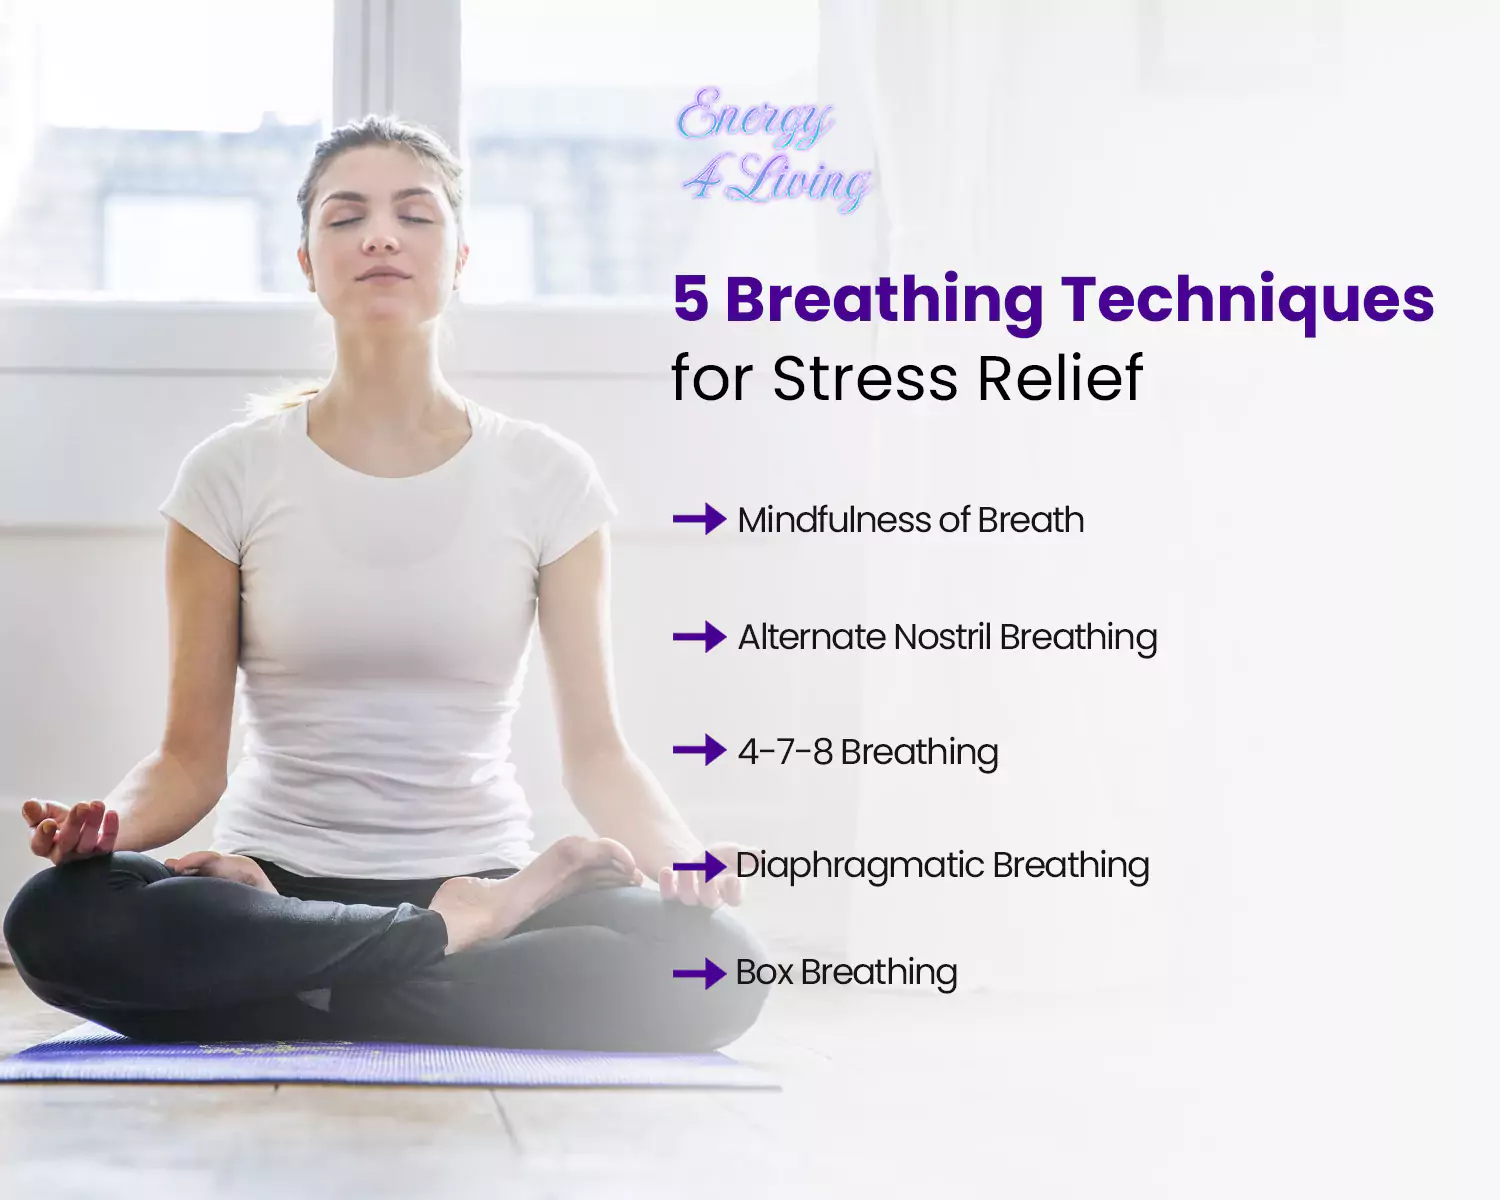 5 Breathing Techniques for Stress Relief